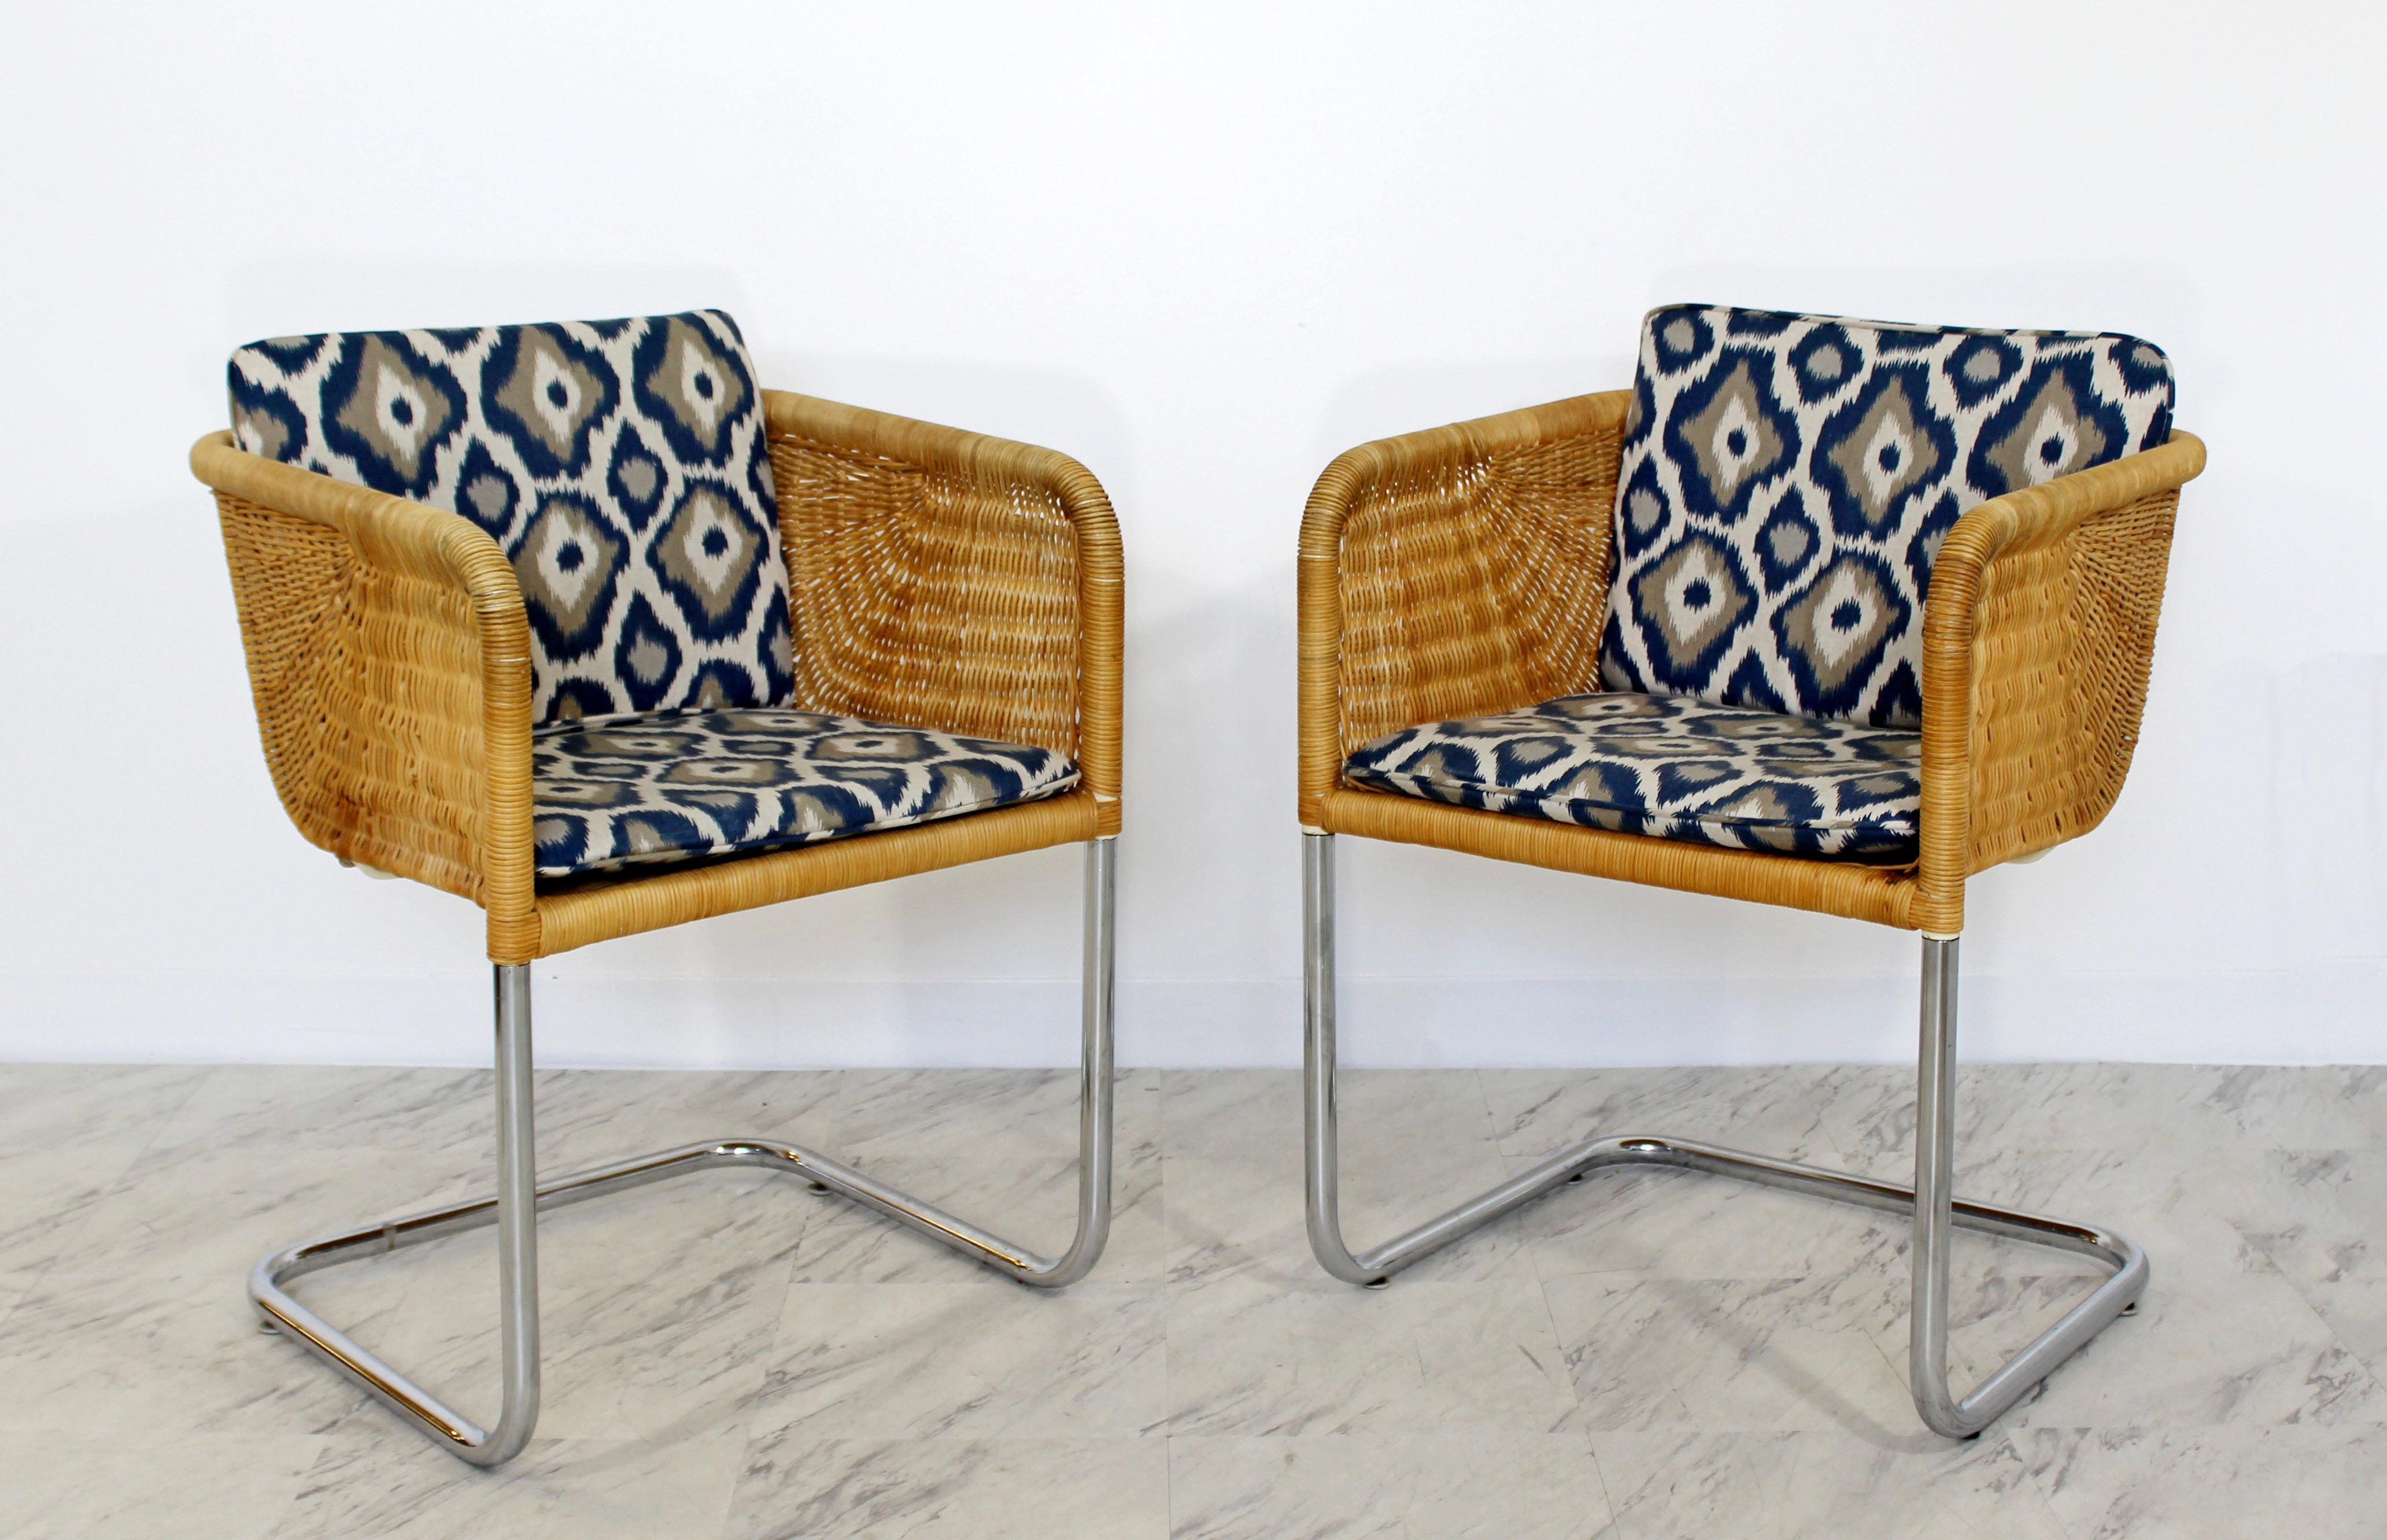 For your consideration is a fabulous, set of four Harvey Probber bucket dining armchairs, made of wicker and chrome, circa the 1960s. In very good condition. The dimensions are 21.5